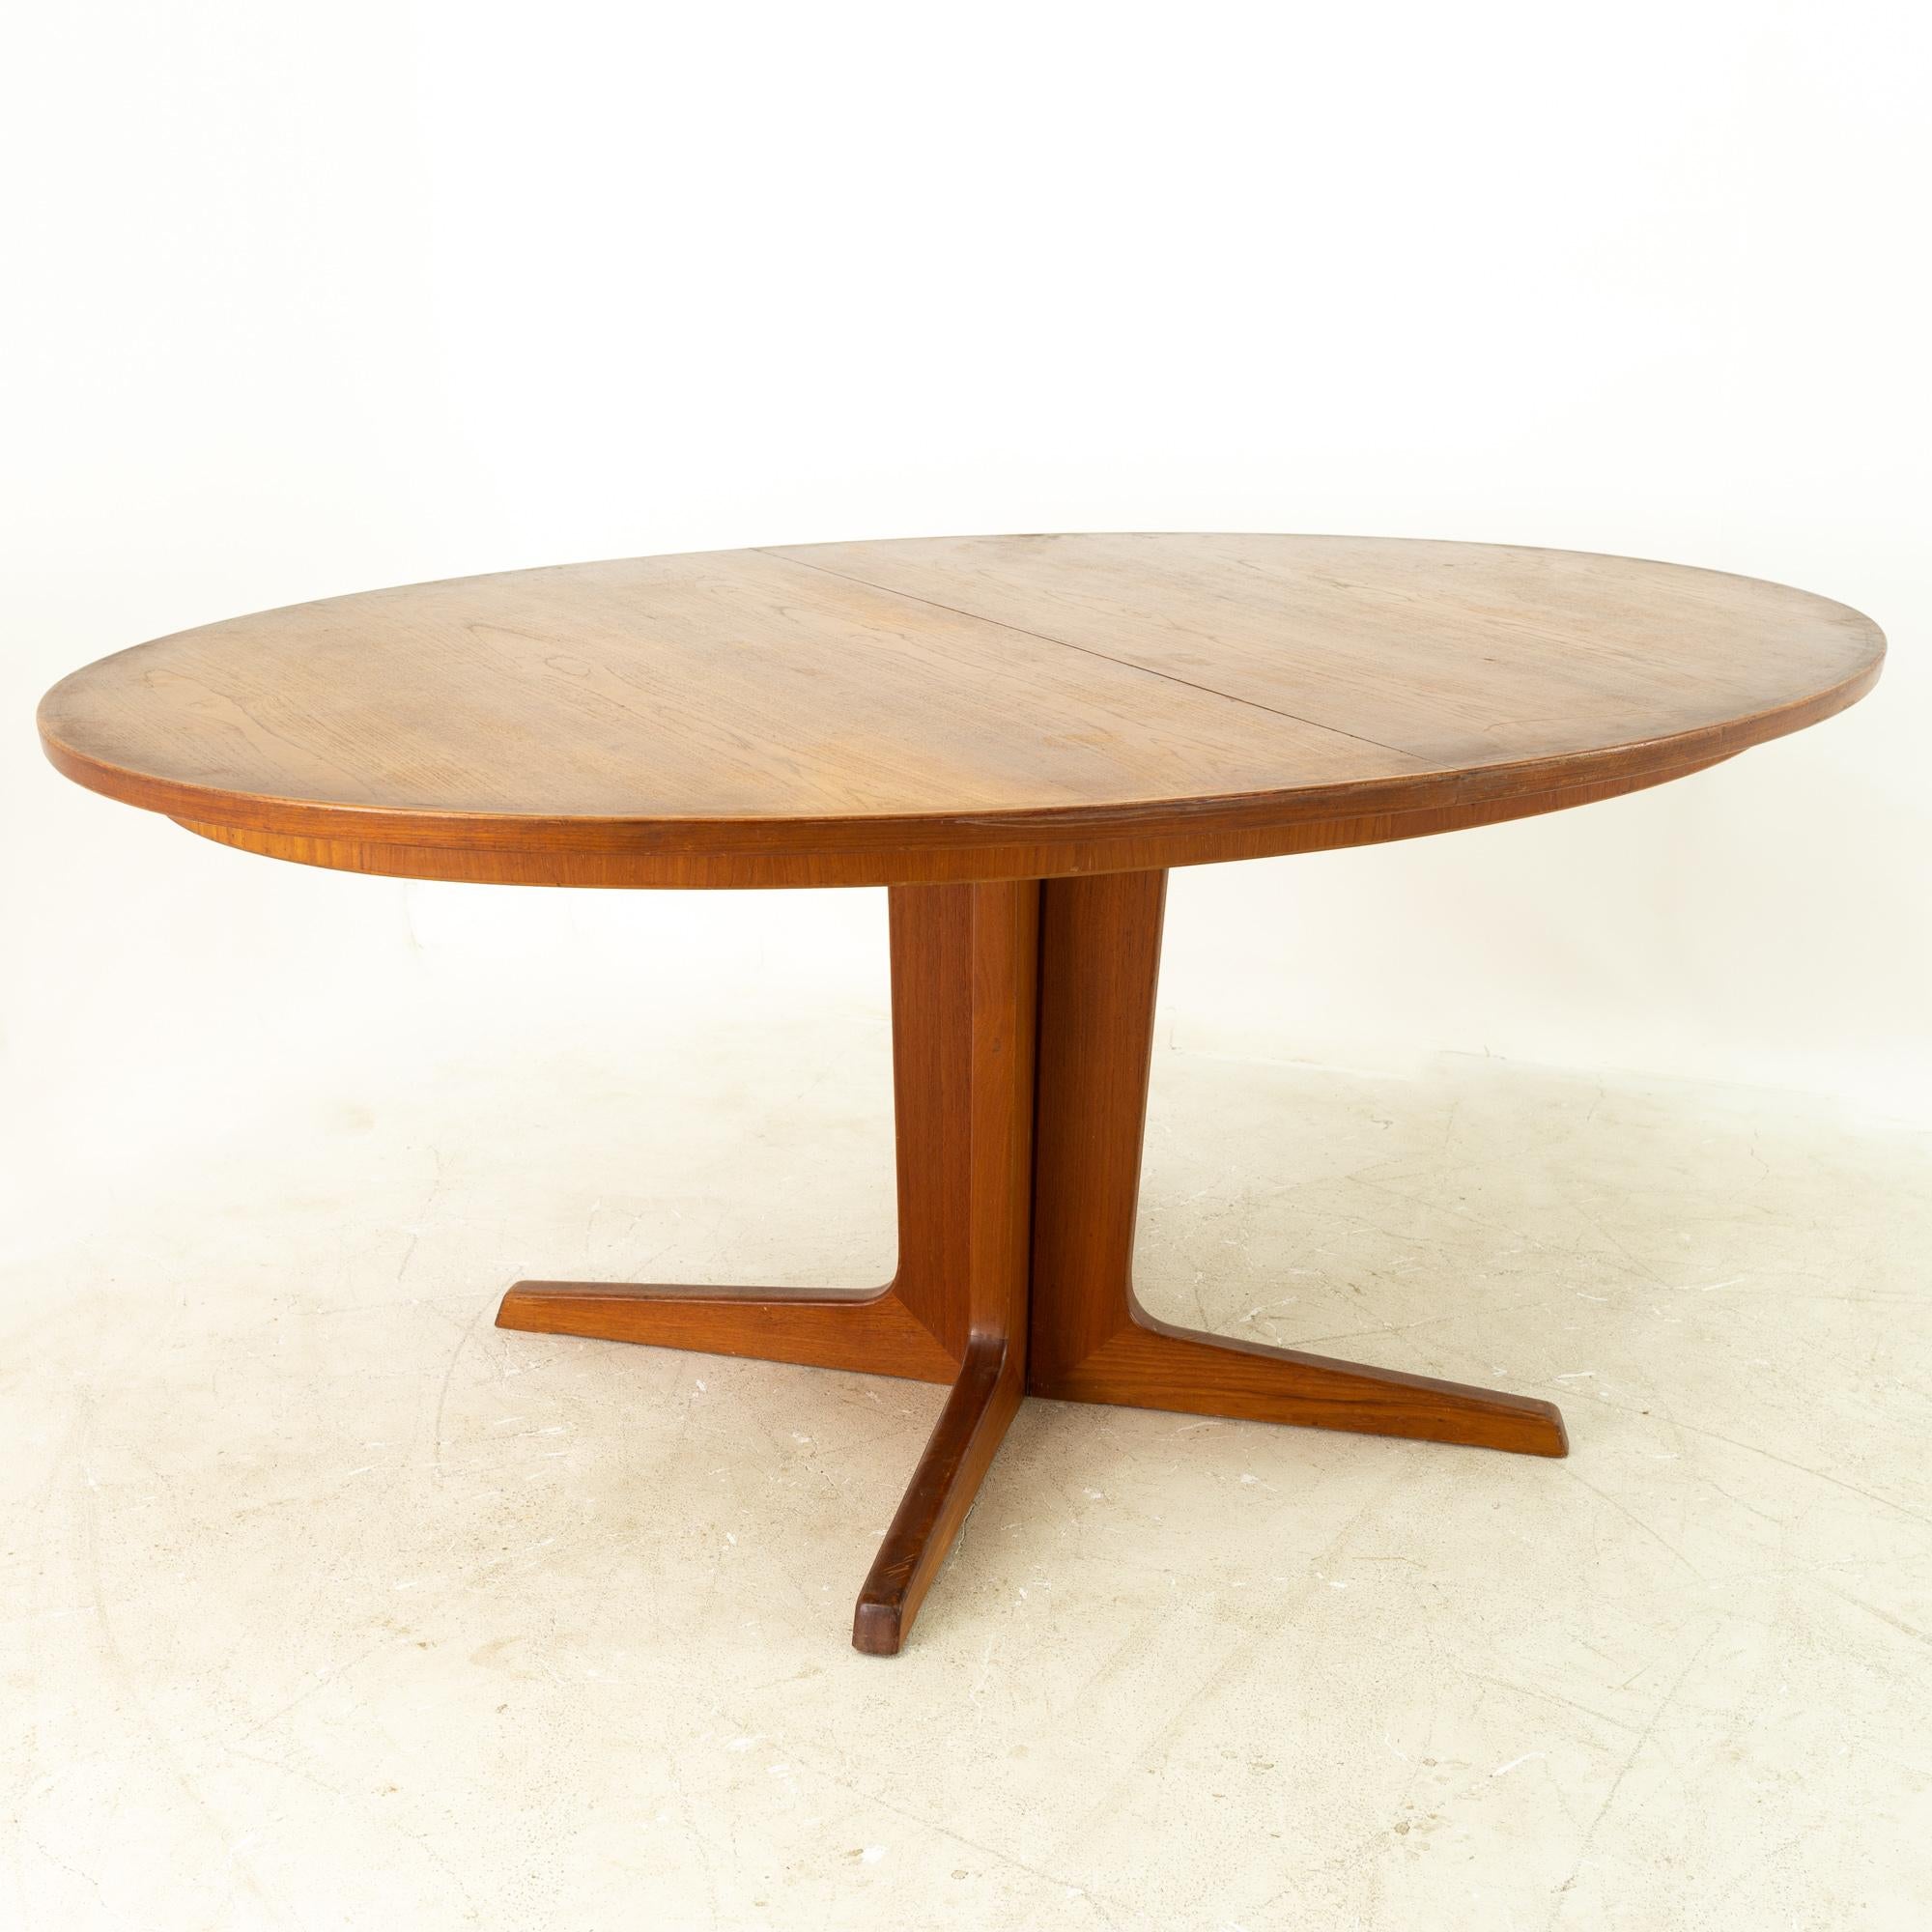 Niels Koefoeds for Uldum Mobelfabrik Mid Century Danish Teak Oval Dining Table

Measures: 68 wide x 44.75 deep x 28.5 high

This price includes getting this piece in what we call restored vintage condition. That means the piece is permanently fixed